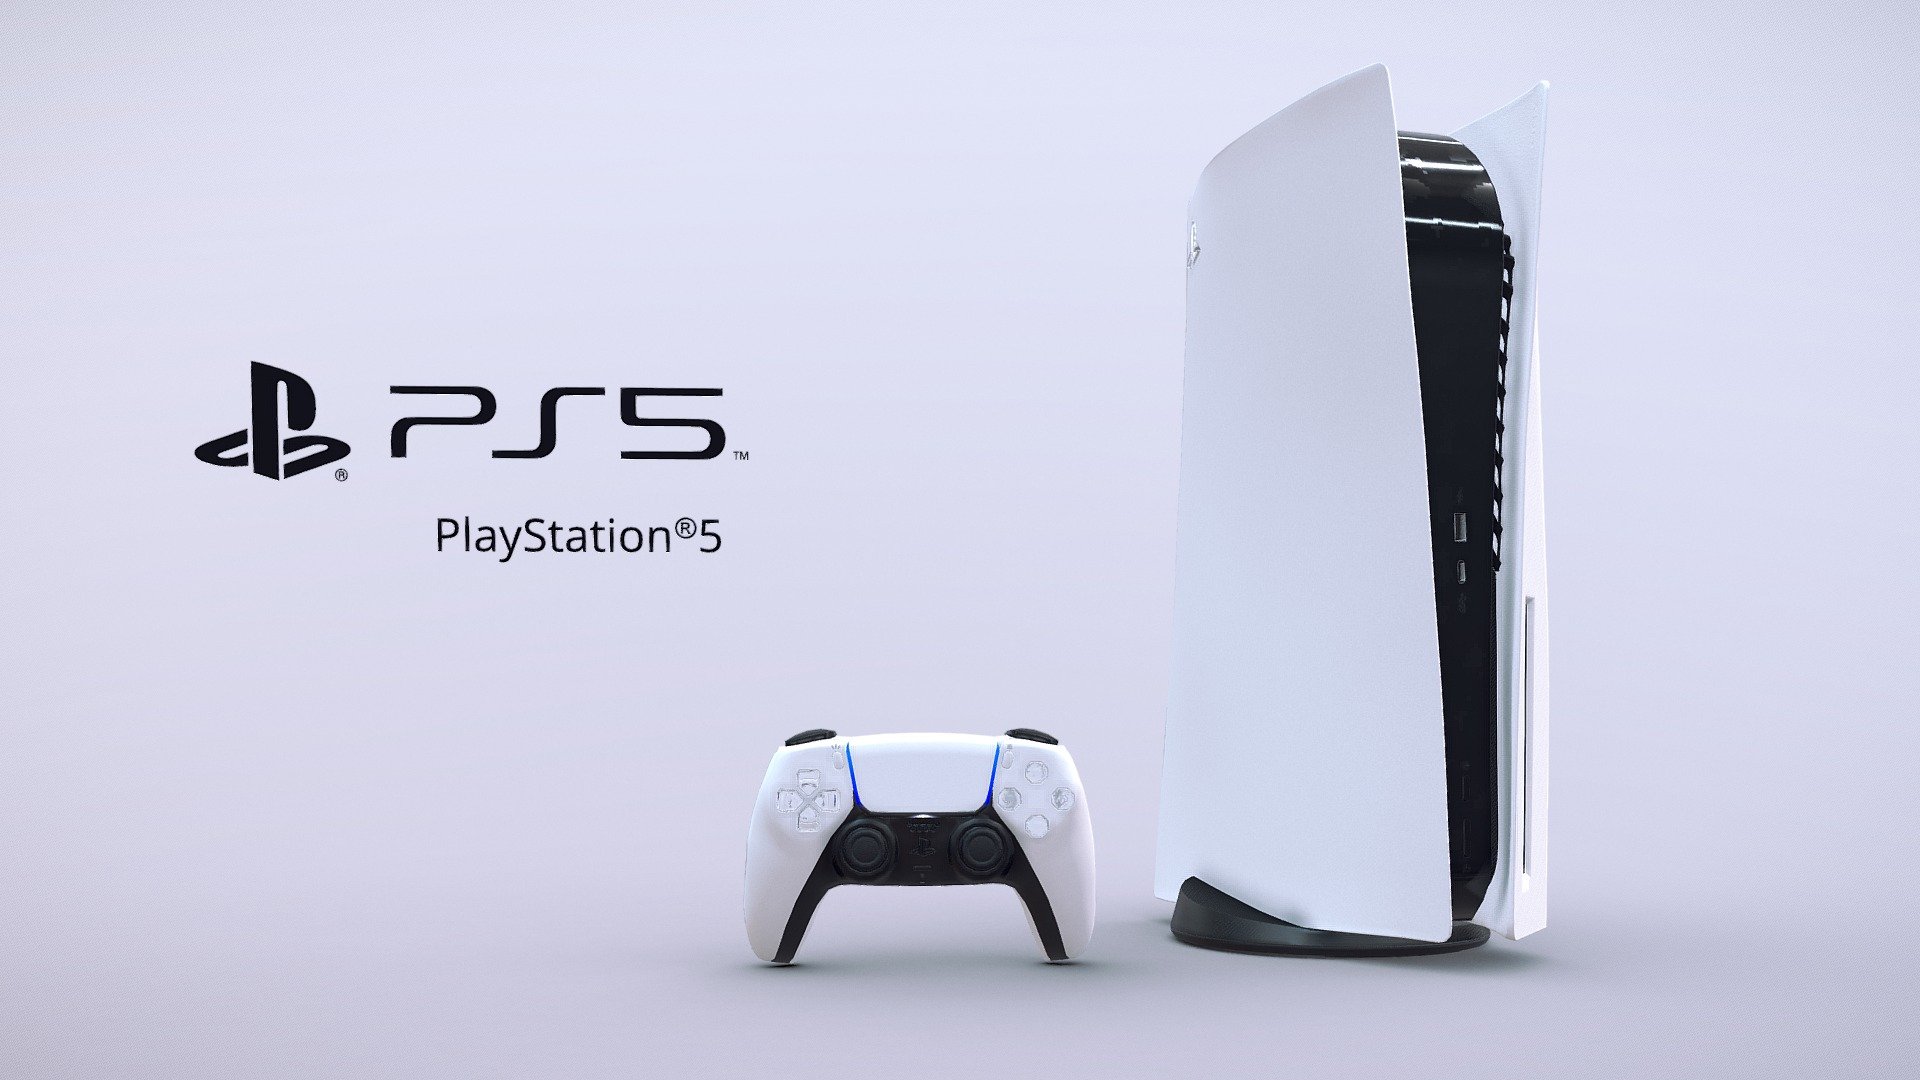 A collection of Playstation 5 and Dualsense controller models, with a PBR workflow, mainly suitable for realism purposes (e. g. interior archviz), but is also compatible to use for VR/AR projects, and as a game asset, if desired.

The collection contains a Zip file, with:




2 Versions with each model/set, for every file format: Beveled - suitable for subdivision and/or smooth shading, Subdivided - subdivided in advance;

Tailored textures with multiple resolutions (2K, 4K, 6k, and 8K for some assets) for a PBR Metalness workflow, such as DIFFUSE/METALLIC/ROUGHNESS/NORMAL;

Both OpenGL and DirectX normal maps;

An additional preview scene with a camera, lights, and a background;

All models and their versions are properly UV unwrapped, appropriate pivot/origin points and object parenting (if needed);

Formats: 




.fbx

.obj

.dae

.blend




Scale: Real World - Metric

Geometry: All quads with few appropriate triangles
 - Sony Playstation 5 and Dualsense Controller Set - Buy Royalty Free 3D model by PatrickZhiaran 3d model